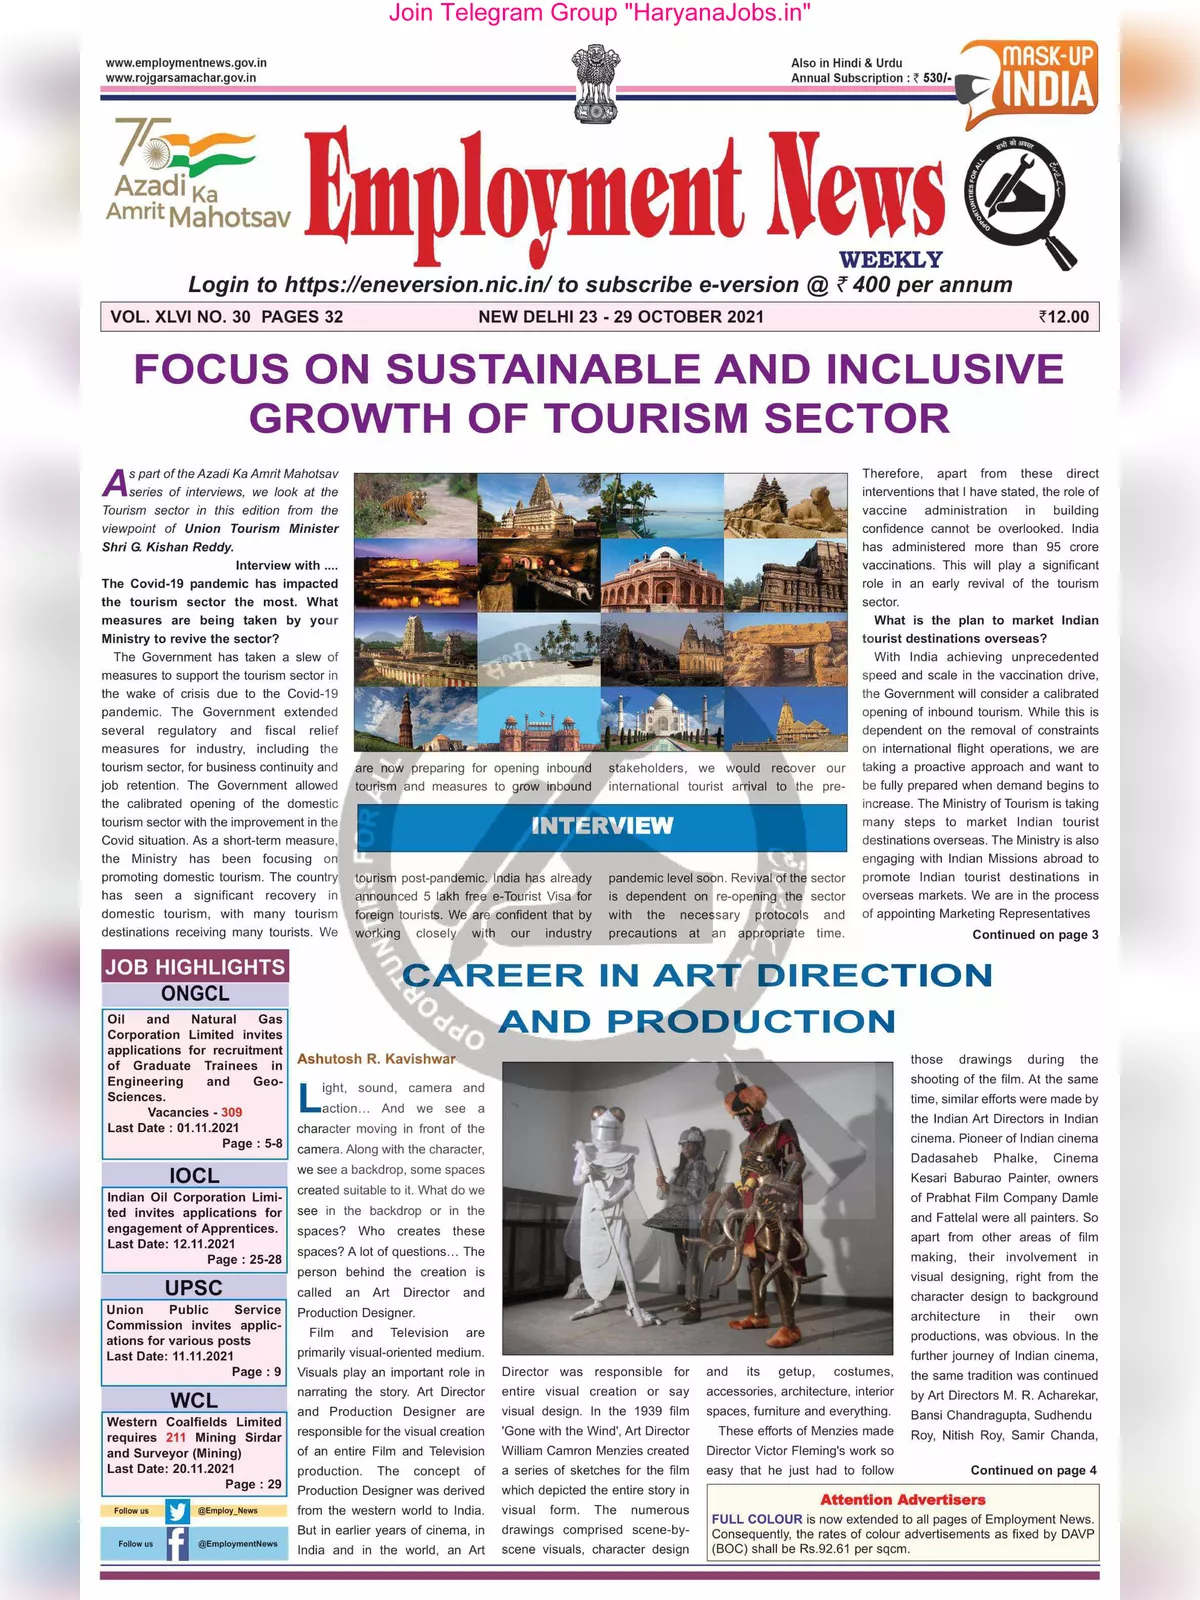 Employment Newspaper Fourth Week of October 2021